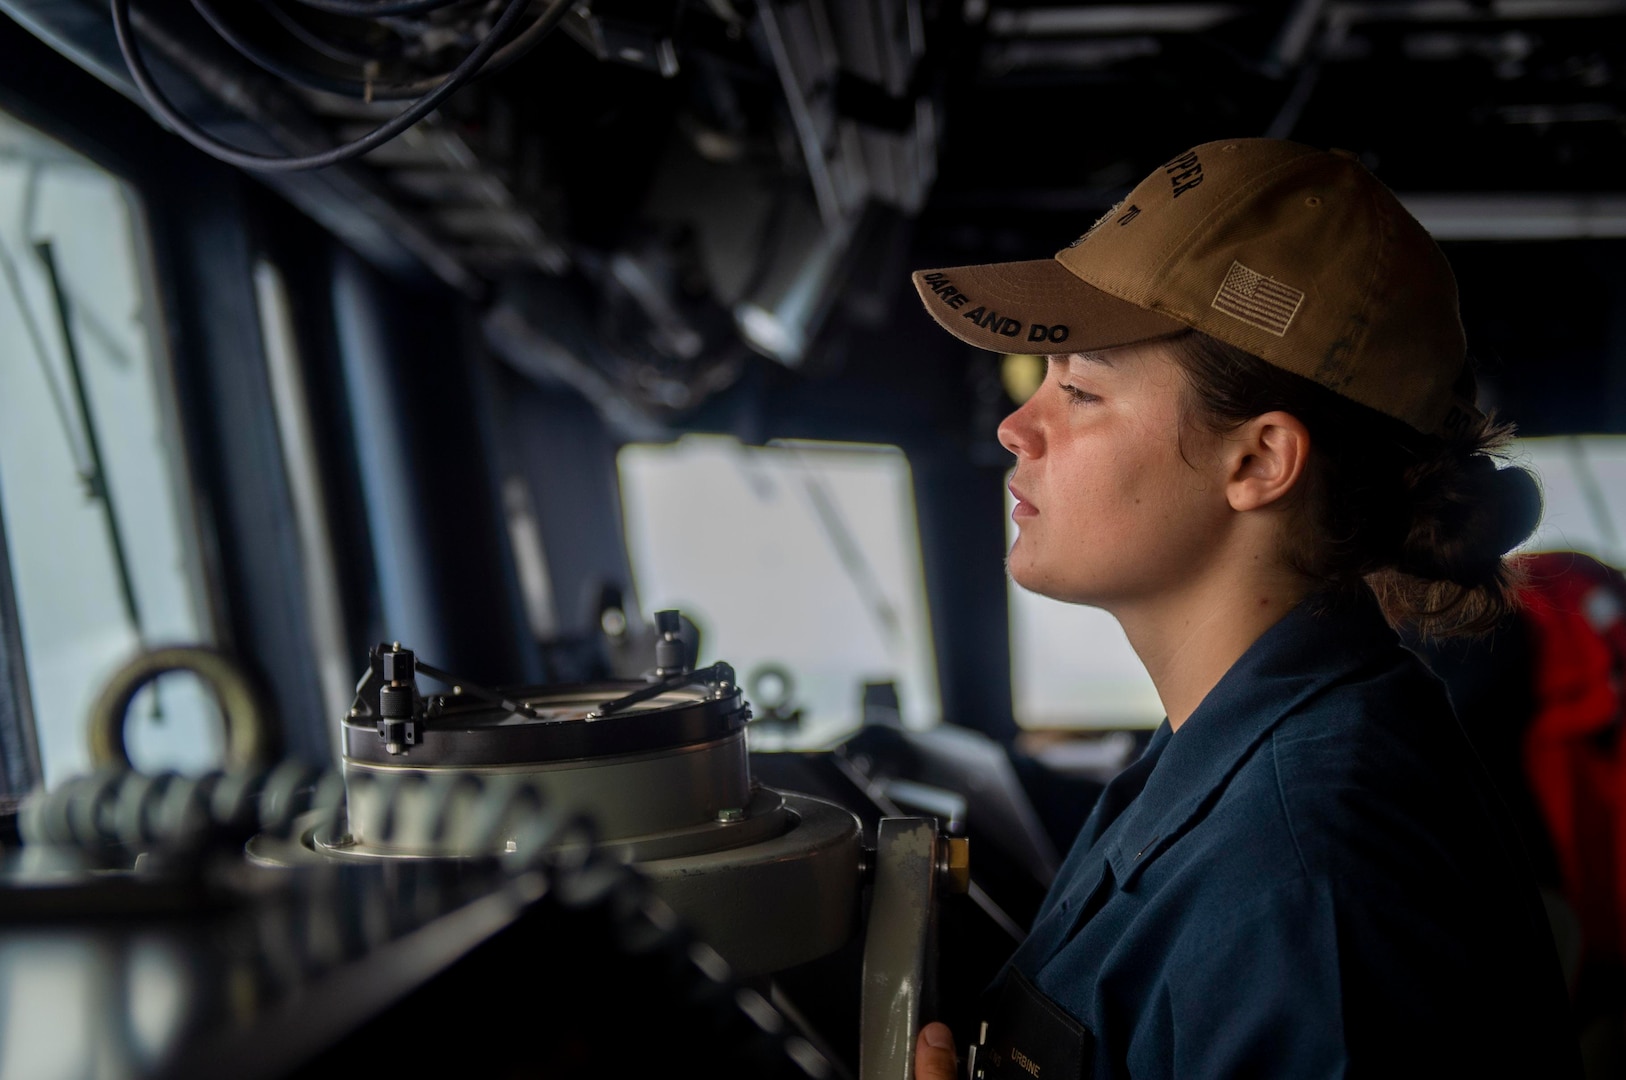 231125-N-EE352-1016 SOUTH CHINA SEA (Nov. 25, 2023) – Ensign Alexandra Urbine, from Philadelphia, Pennsylvania, standing watch as a conning officer in the bridge as the Arleigh Burke-class guided-missile destroyer USS Grace Hopper (DDG 70) conducts routine underway operations. Hopper is forward-deployed to the U.S. 7th Fleet area of operations in support of a free and open Indo-Pacific. (U.S. Navy photo by Mass Communication Specialist 2nd Class Leon Vonguyen)